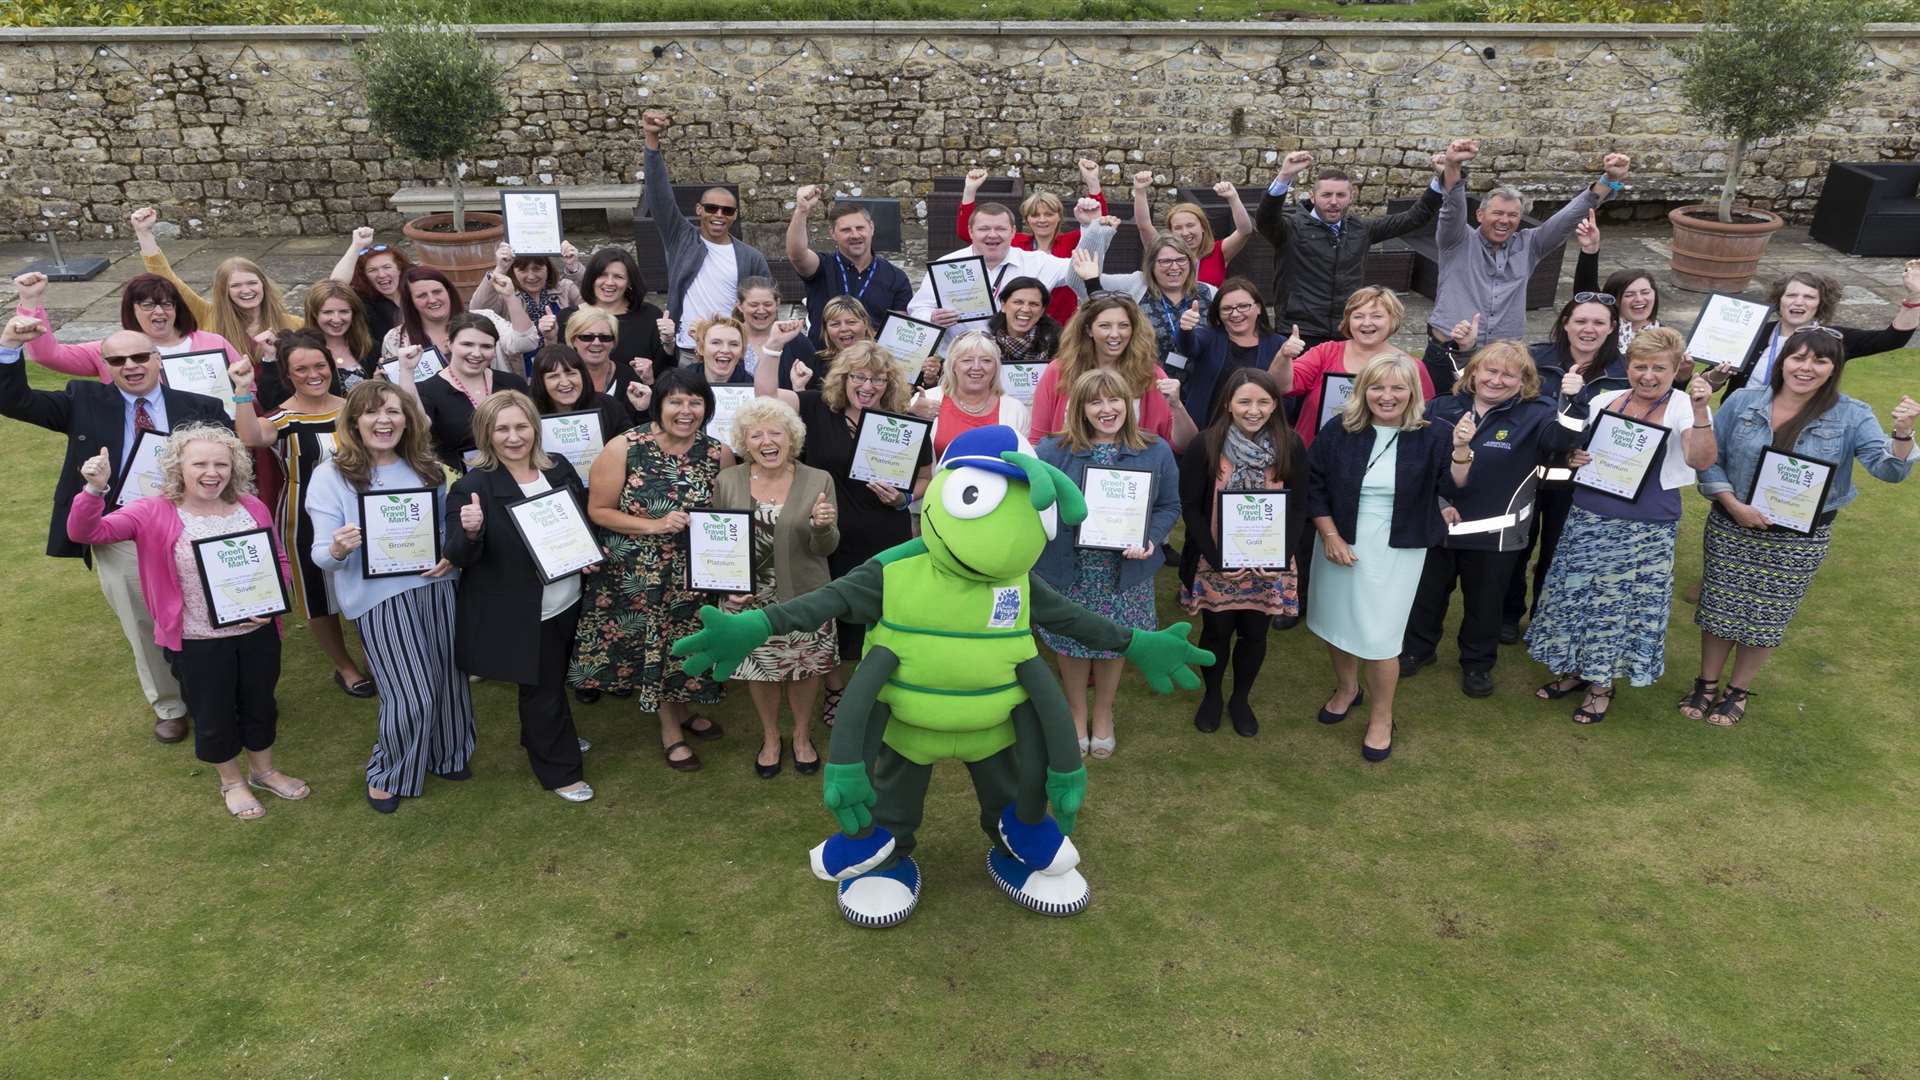 Green Travel Mark Award winners 2017 with supporters at Leeds Castle, Maidstone.